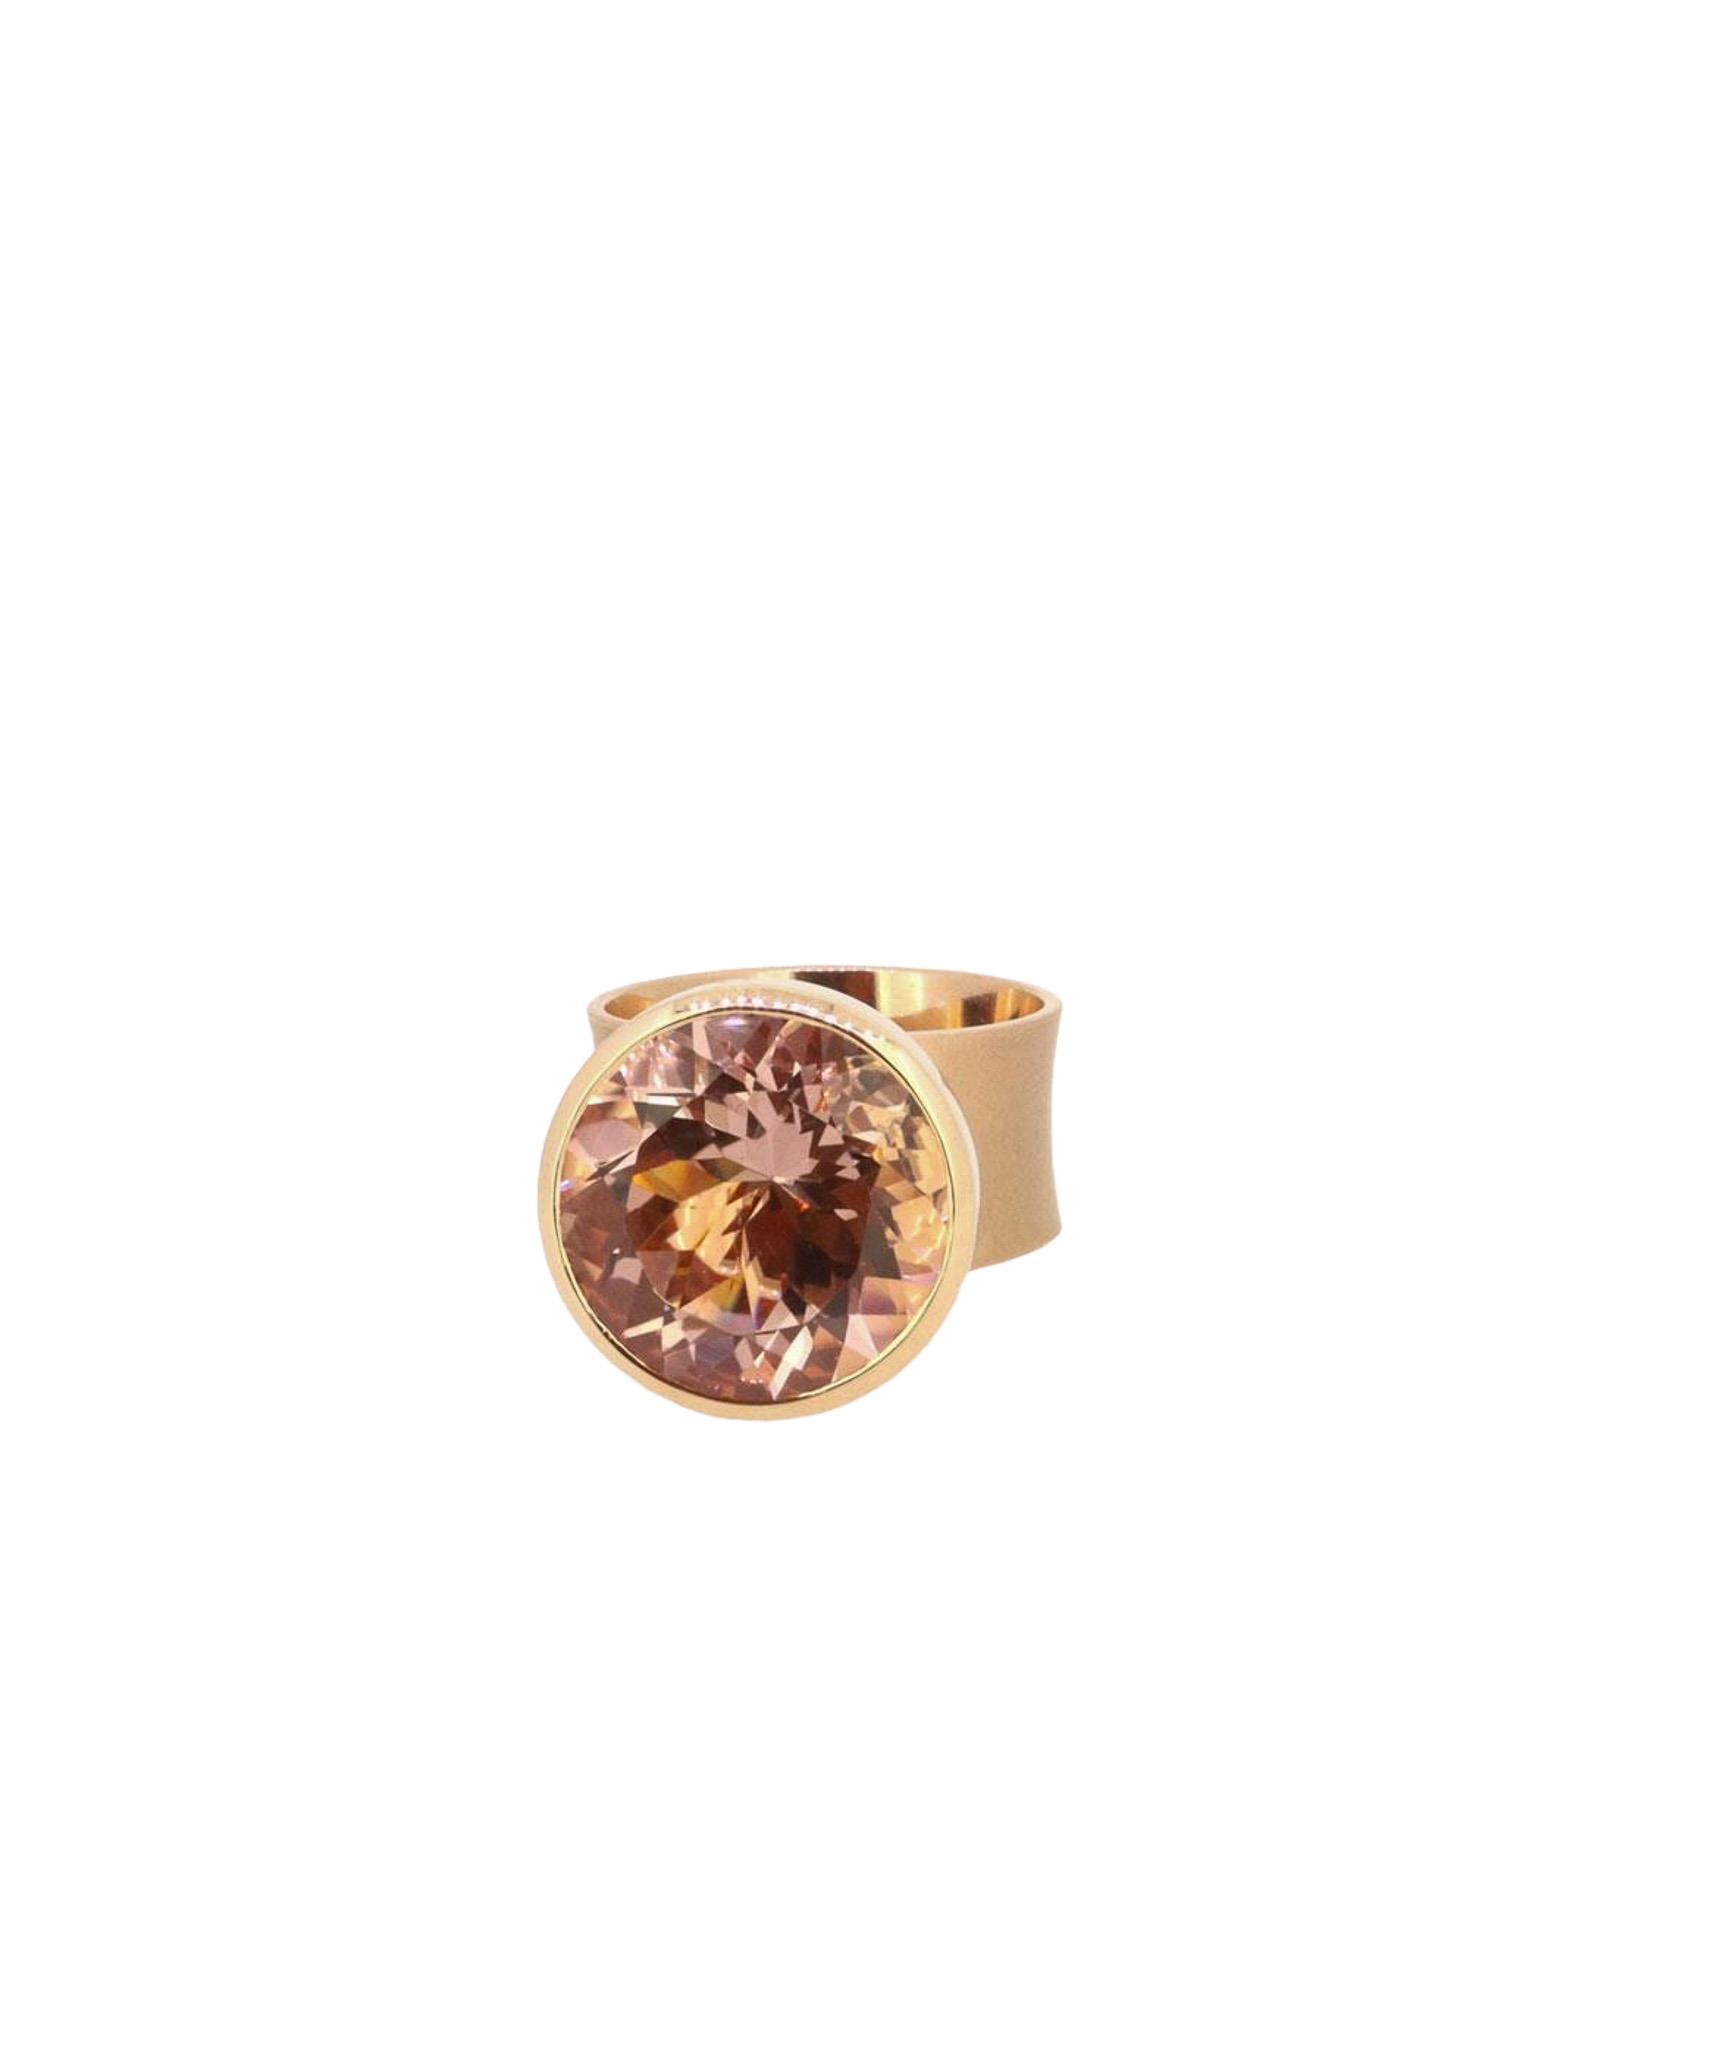 Ring Pokal Morganit 16mm Rotgold - Georg Spreng - 422spre03-6A